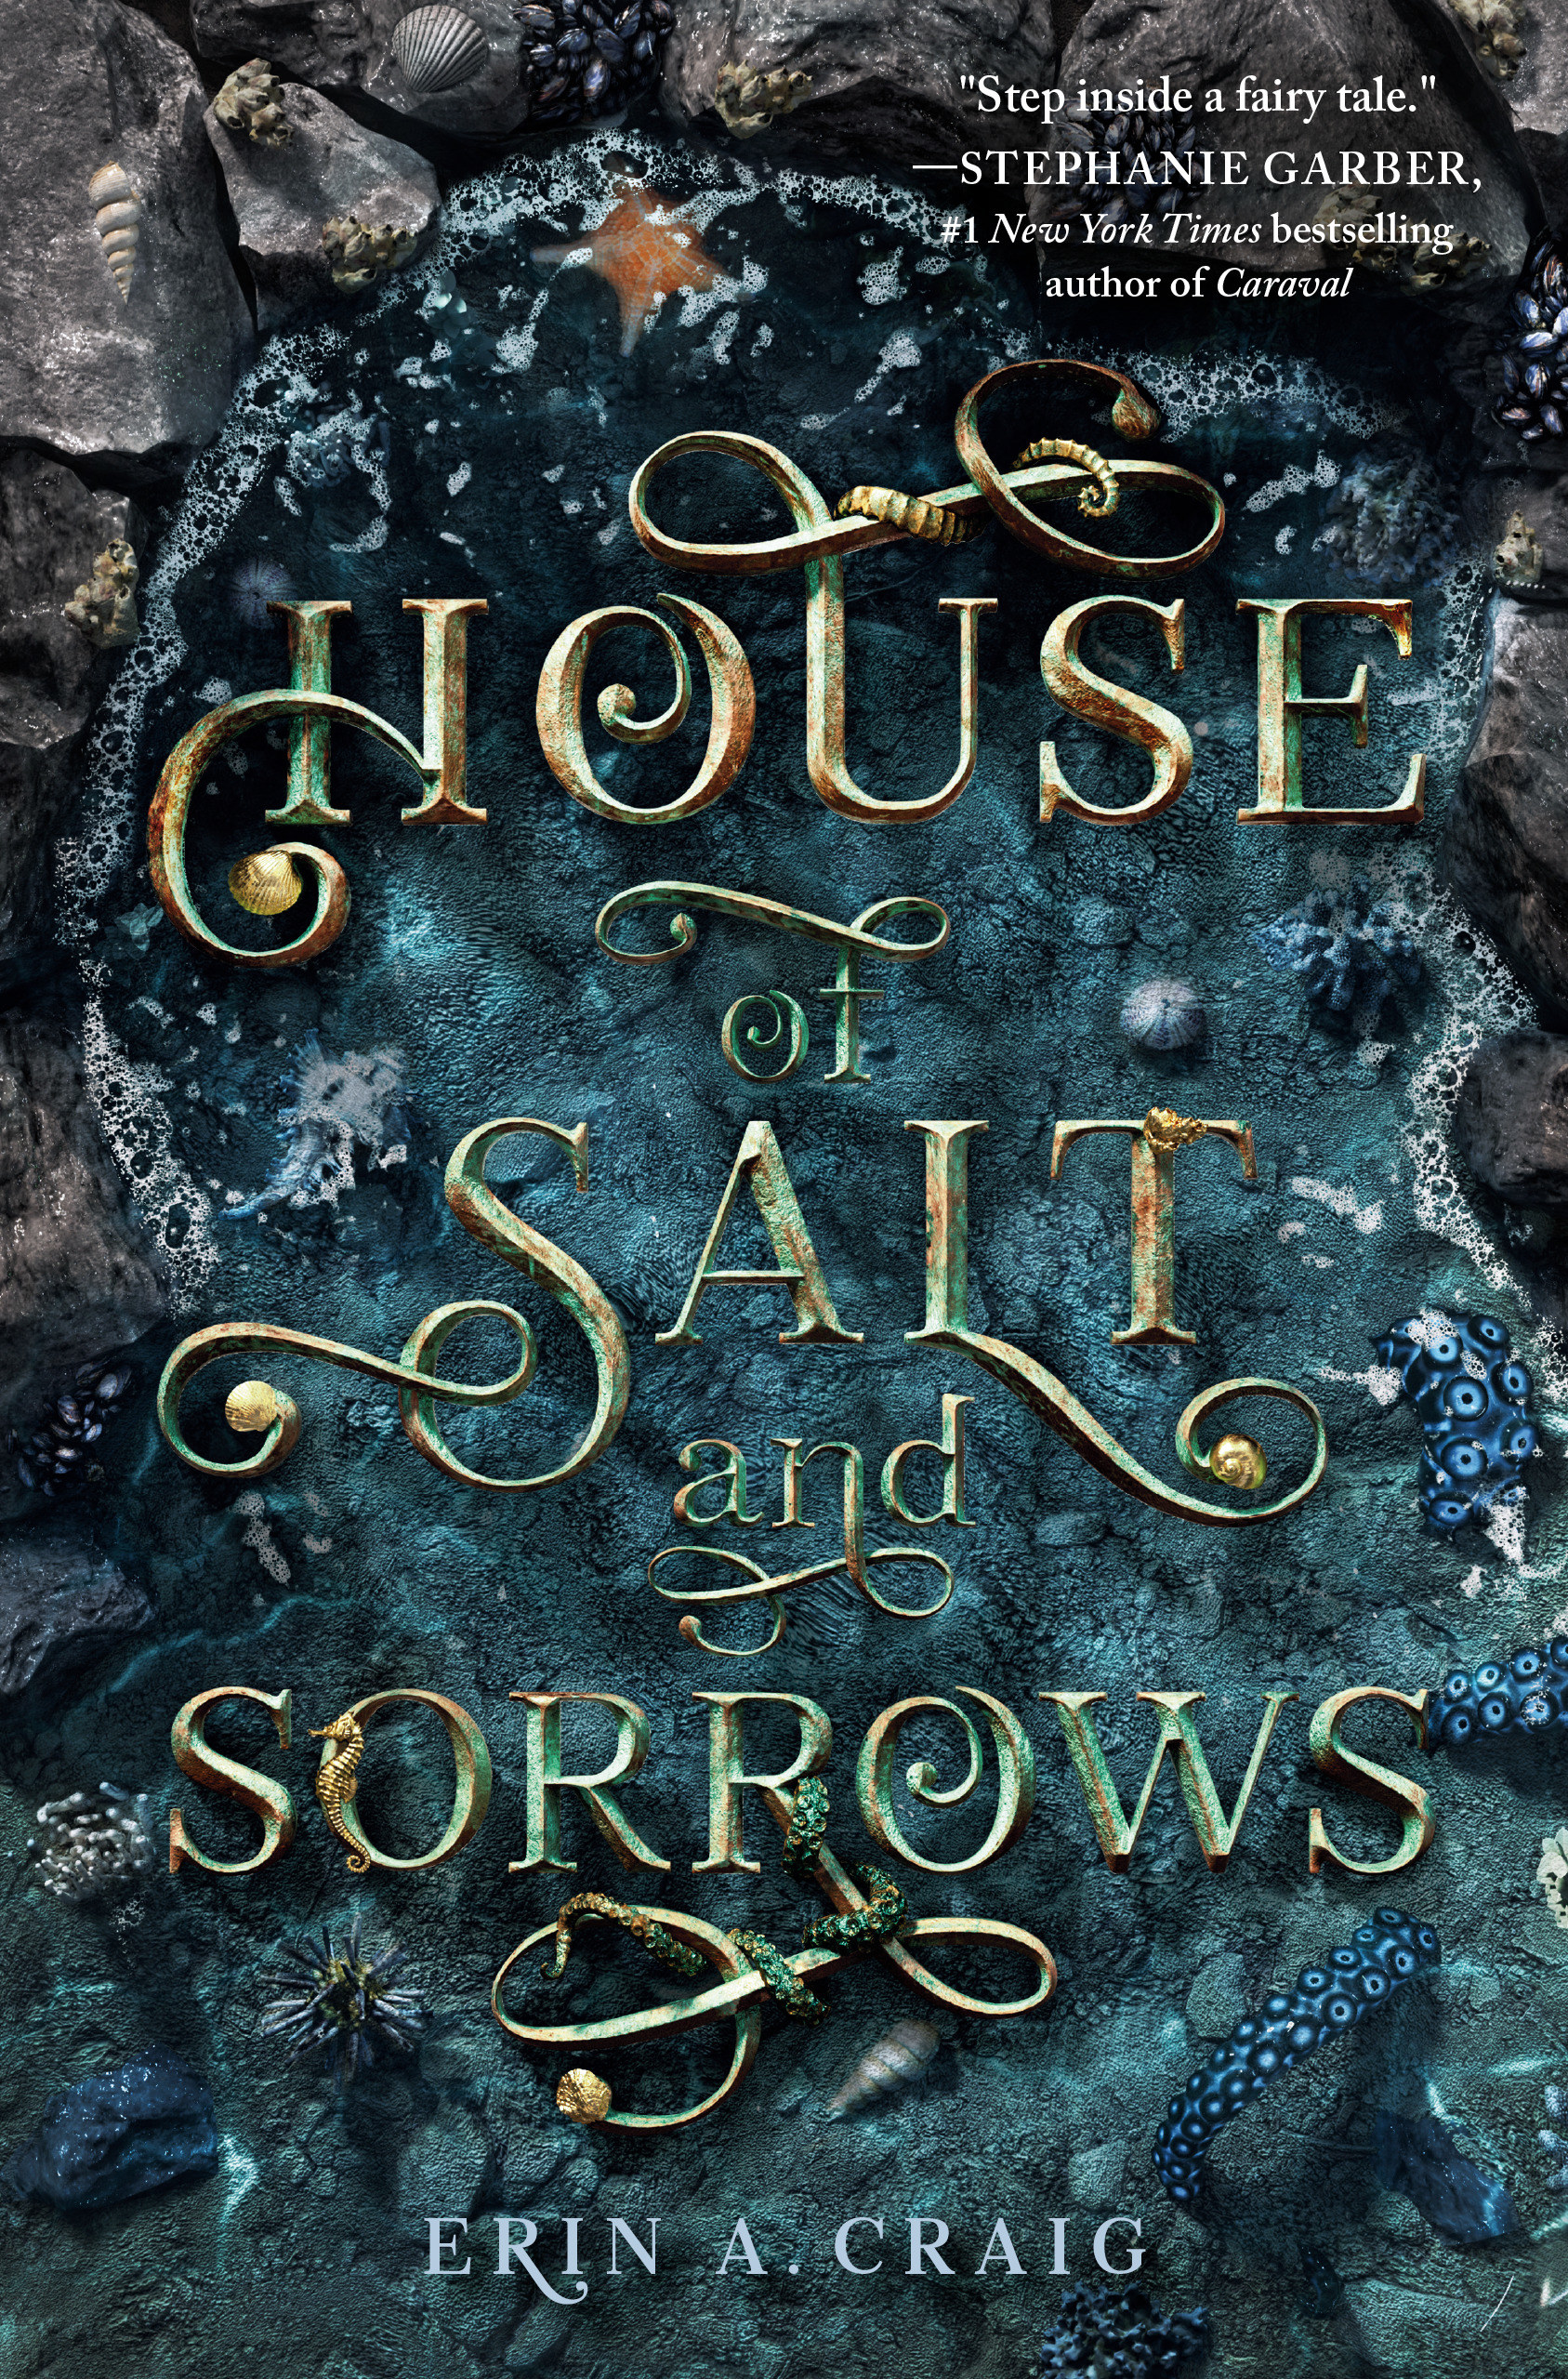 The cover of &quot;House of Salt and Sorrows,&quot; which has curling typography over a tide pool.